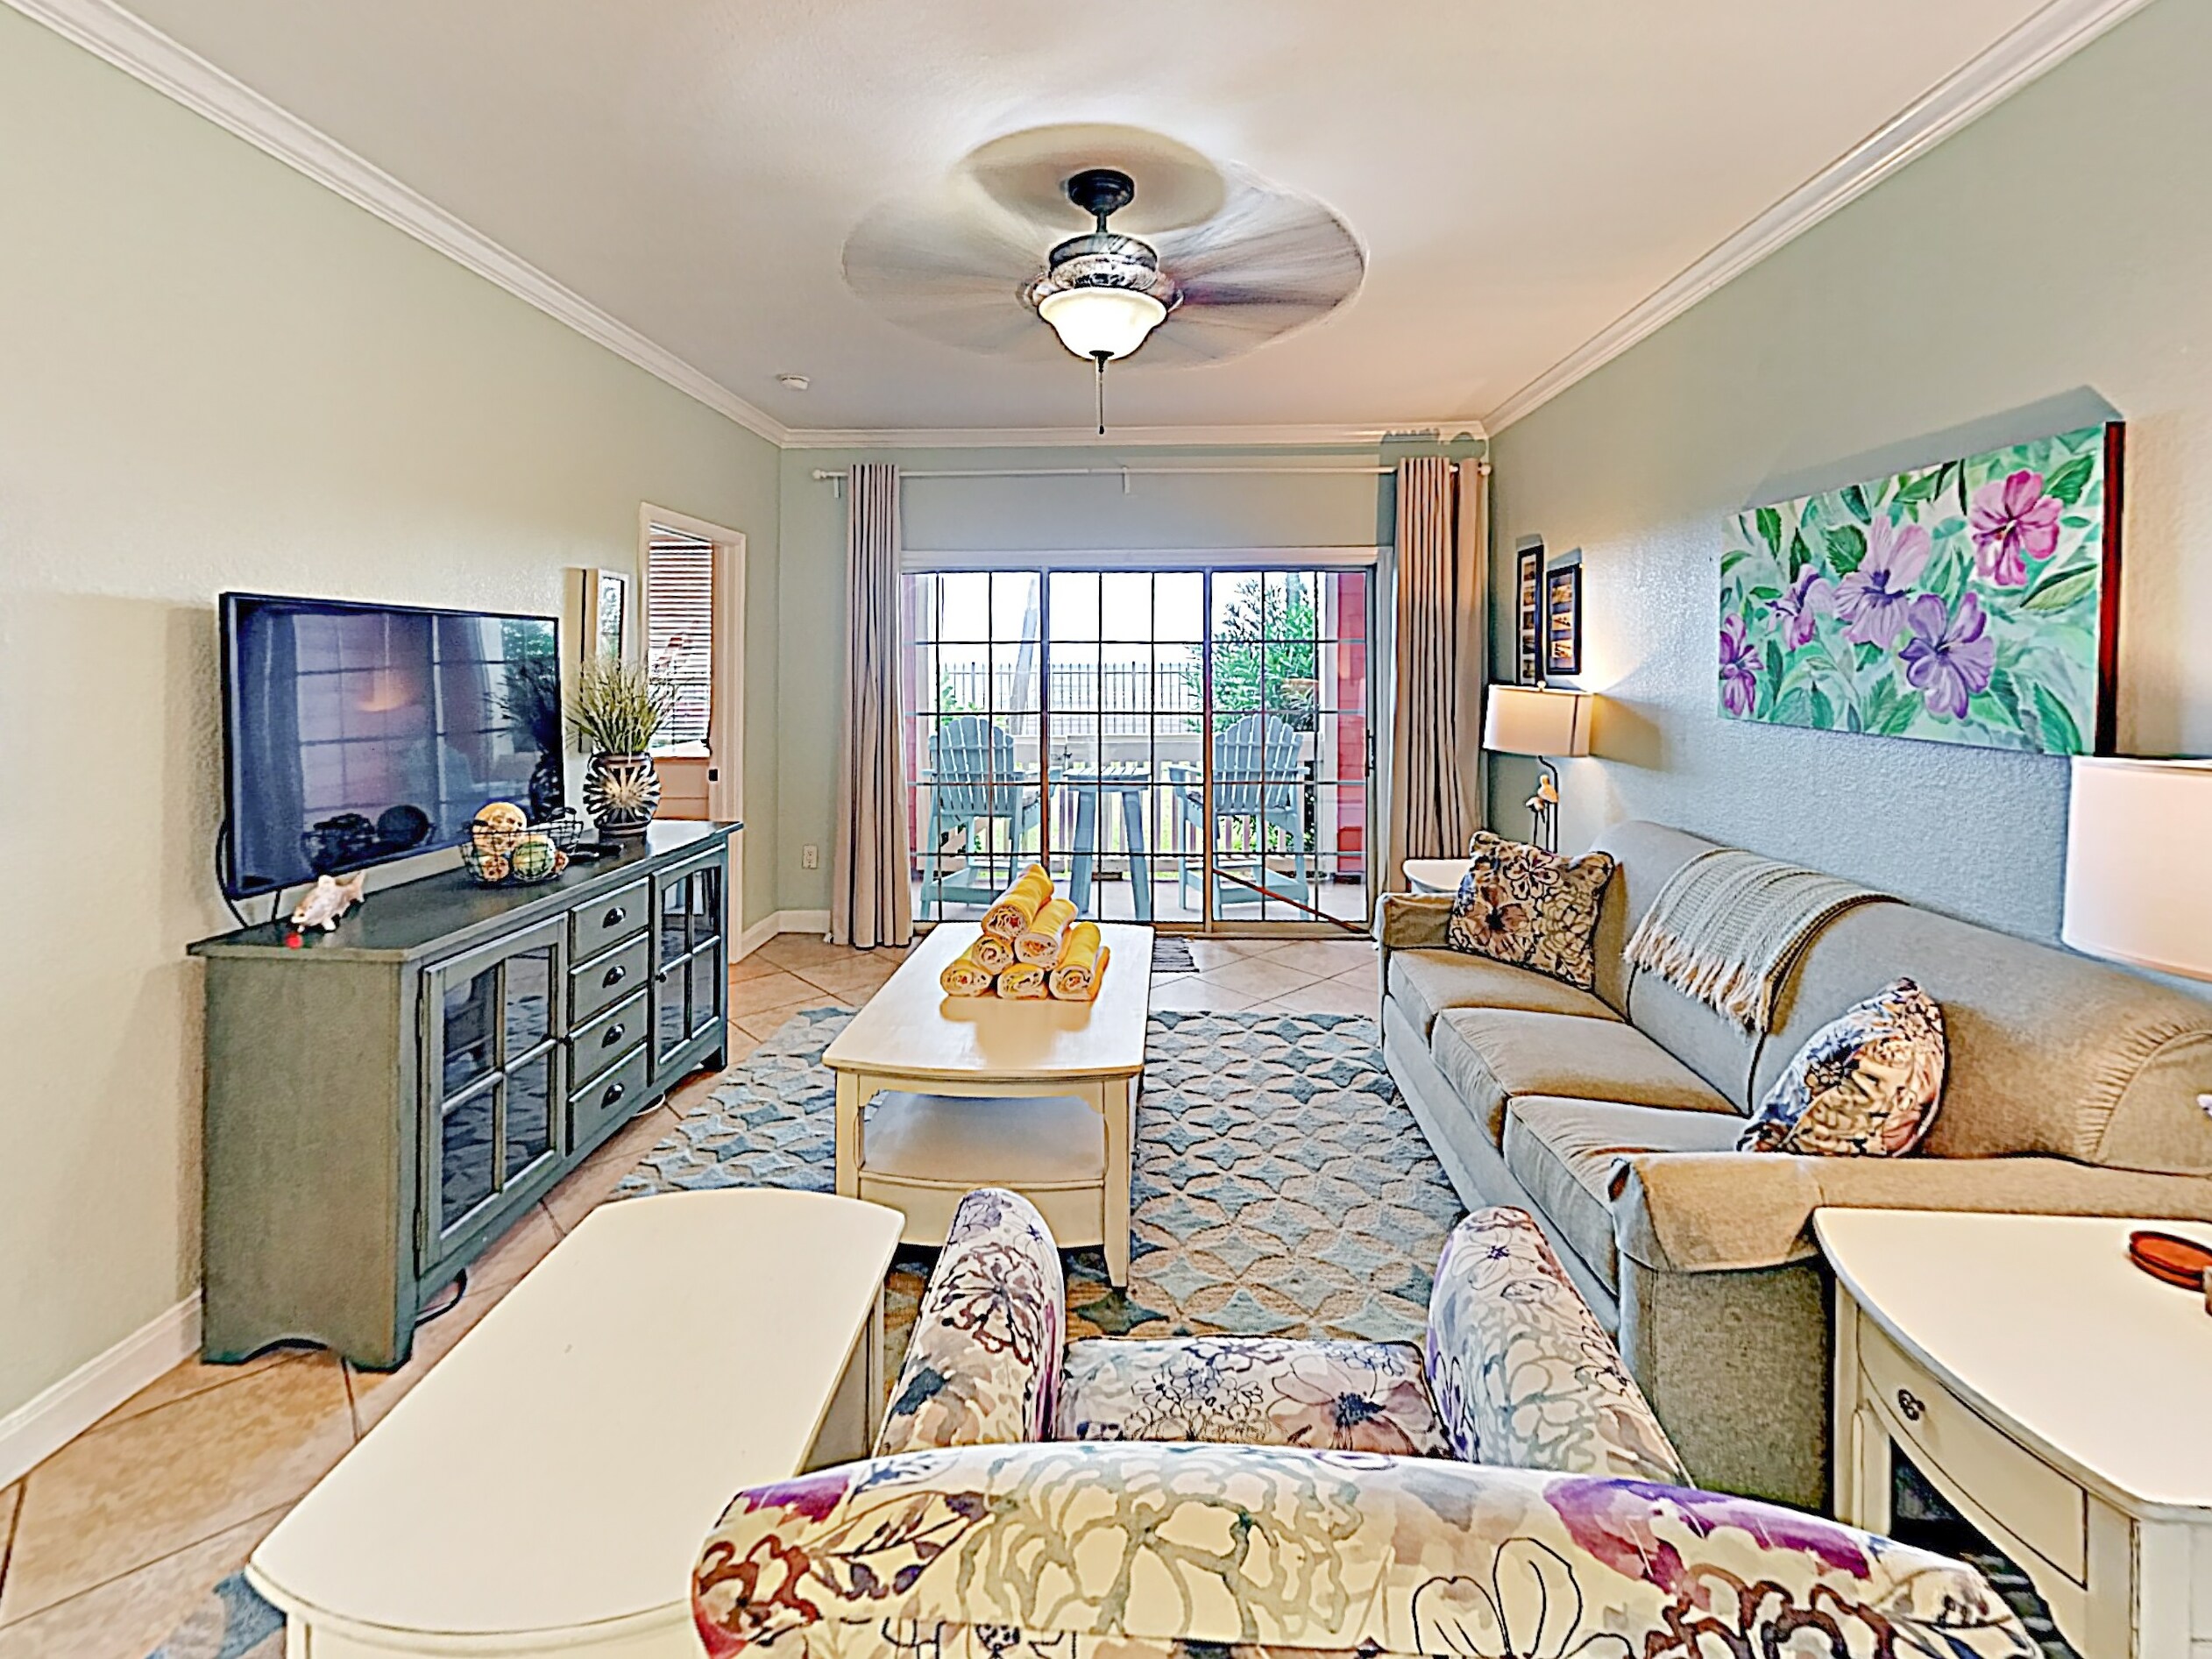 Welcome to Galveston! This beach condo is professionally managed by TurnKey Vacation Rentals.